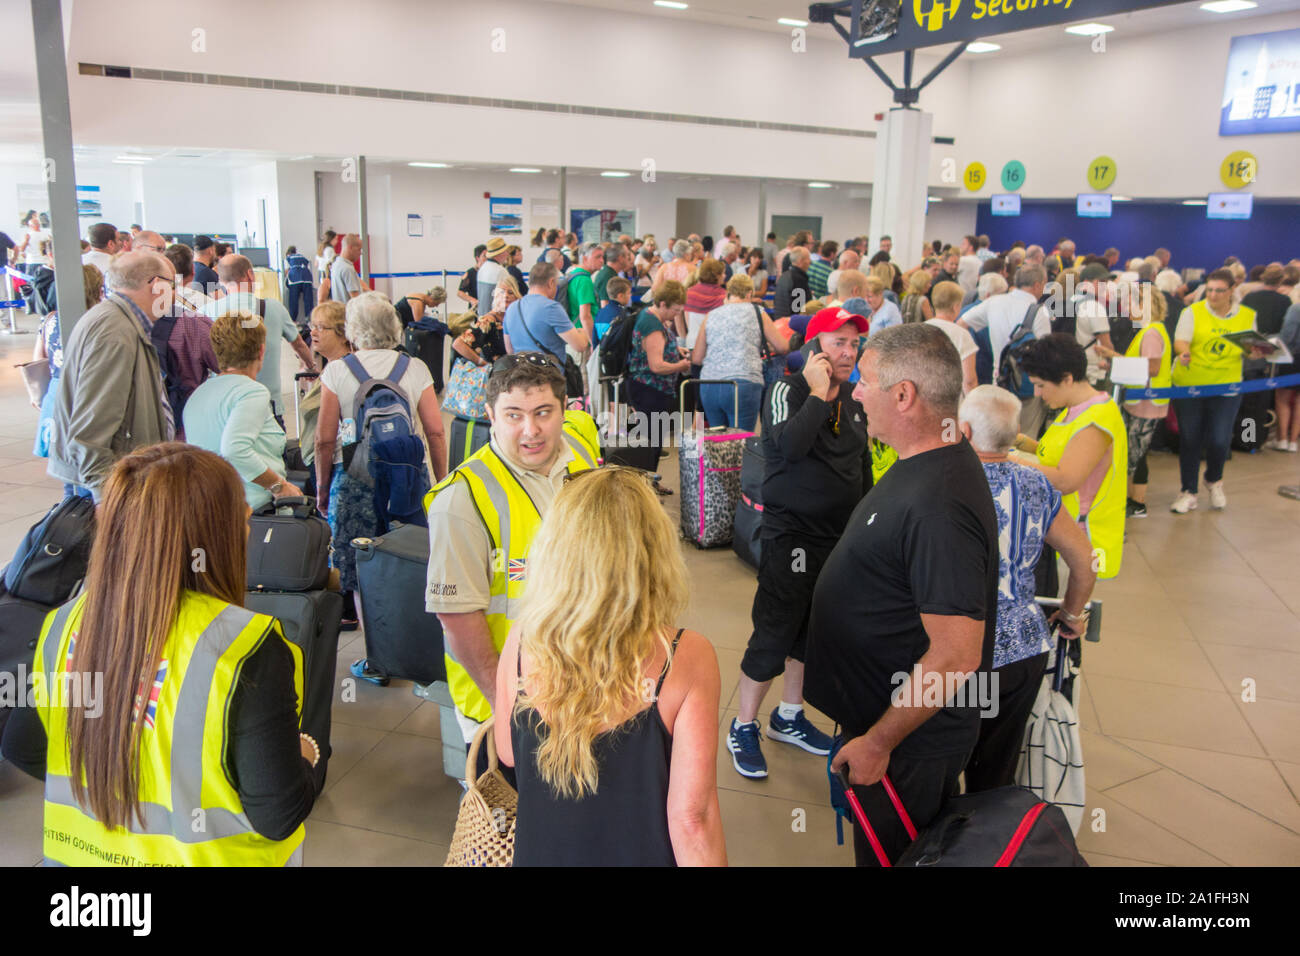 26th September, 2019. Repatriation of British holidaymakers by ATOL and British Government Officials from the Island of Corfu after the collapse of high street travel agent and airline Thomas Cook. Nick Hatton/Alamy Live News Stock Photo